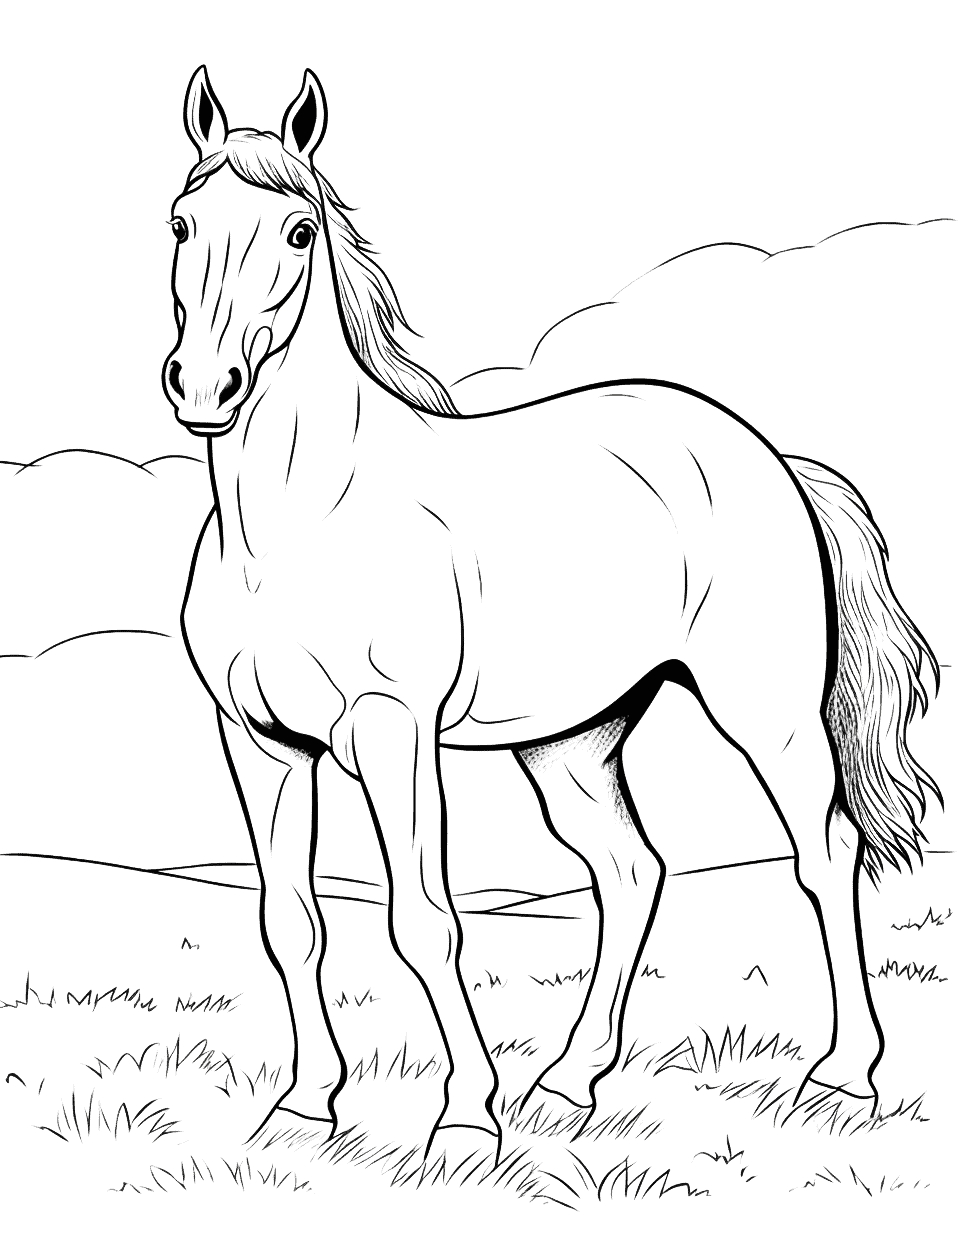 Realistic Quarter Horse Coloring Page - A detailed, lifelike drawing of a Quarter horse standing in a field.